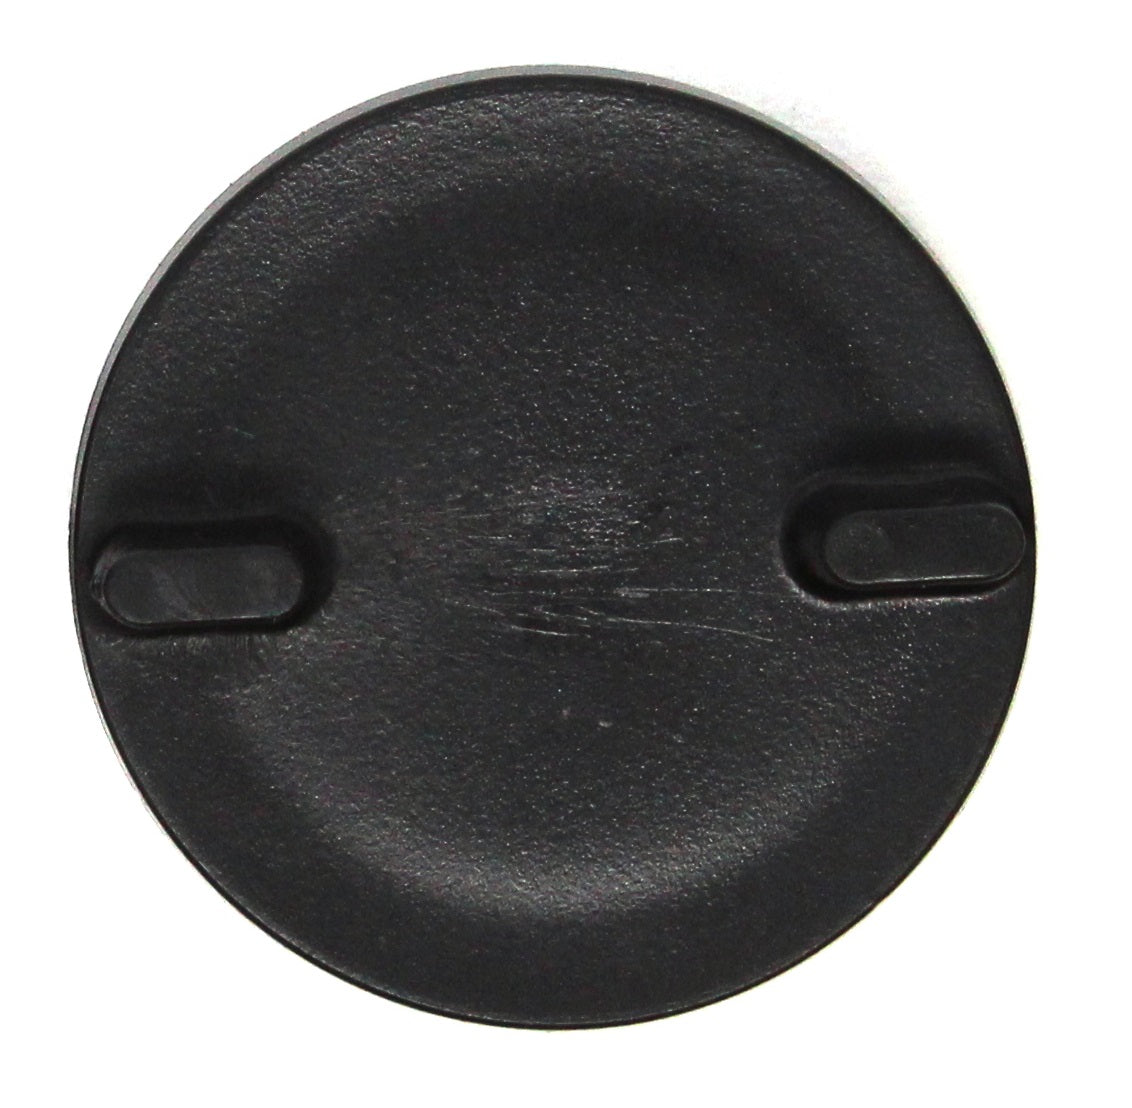 Aftermarket Marine Boat Replacement Gas Deck Fill Cap replaces Seachoice 32501